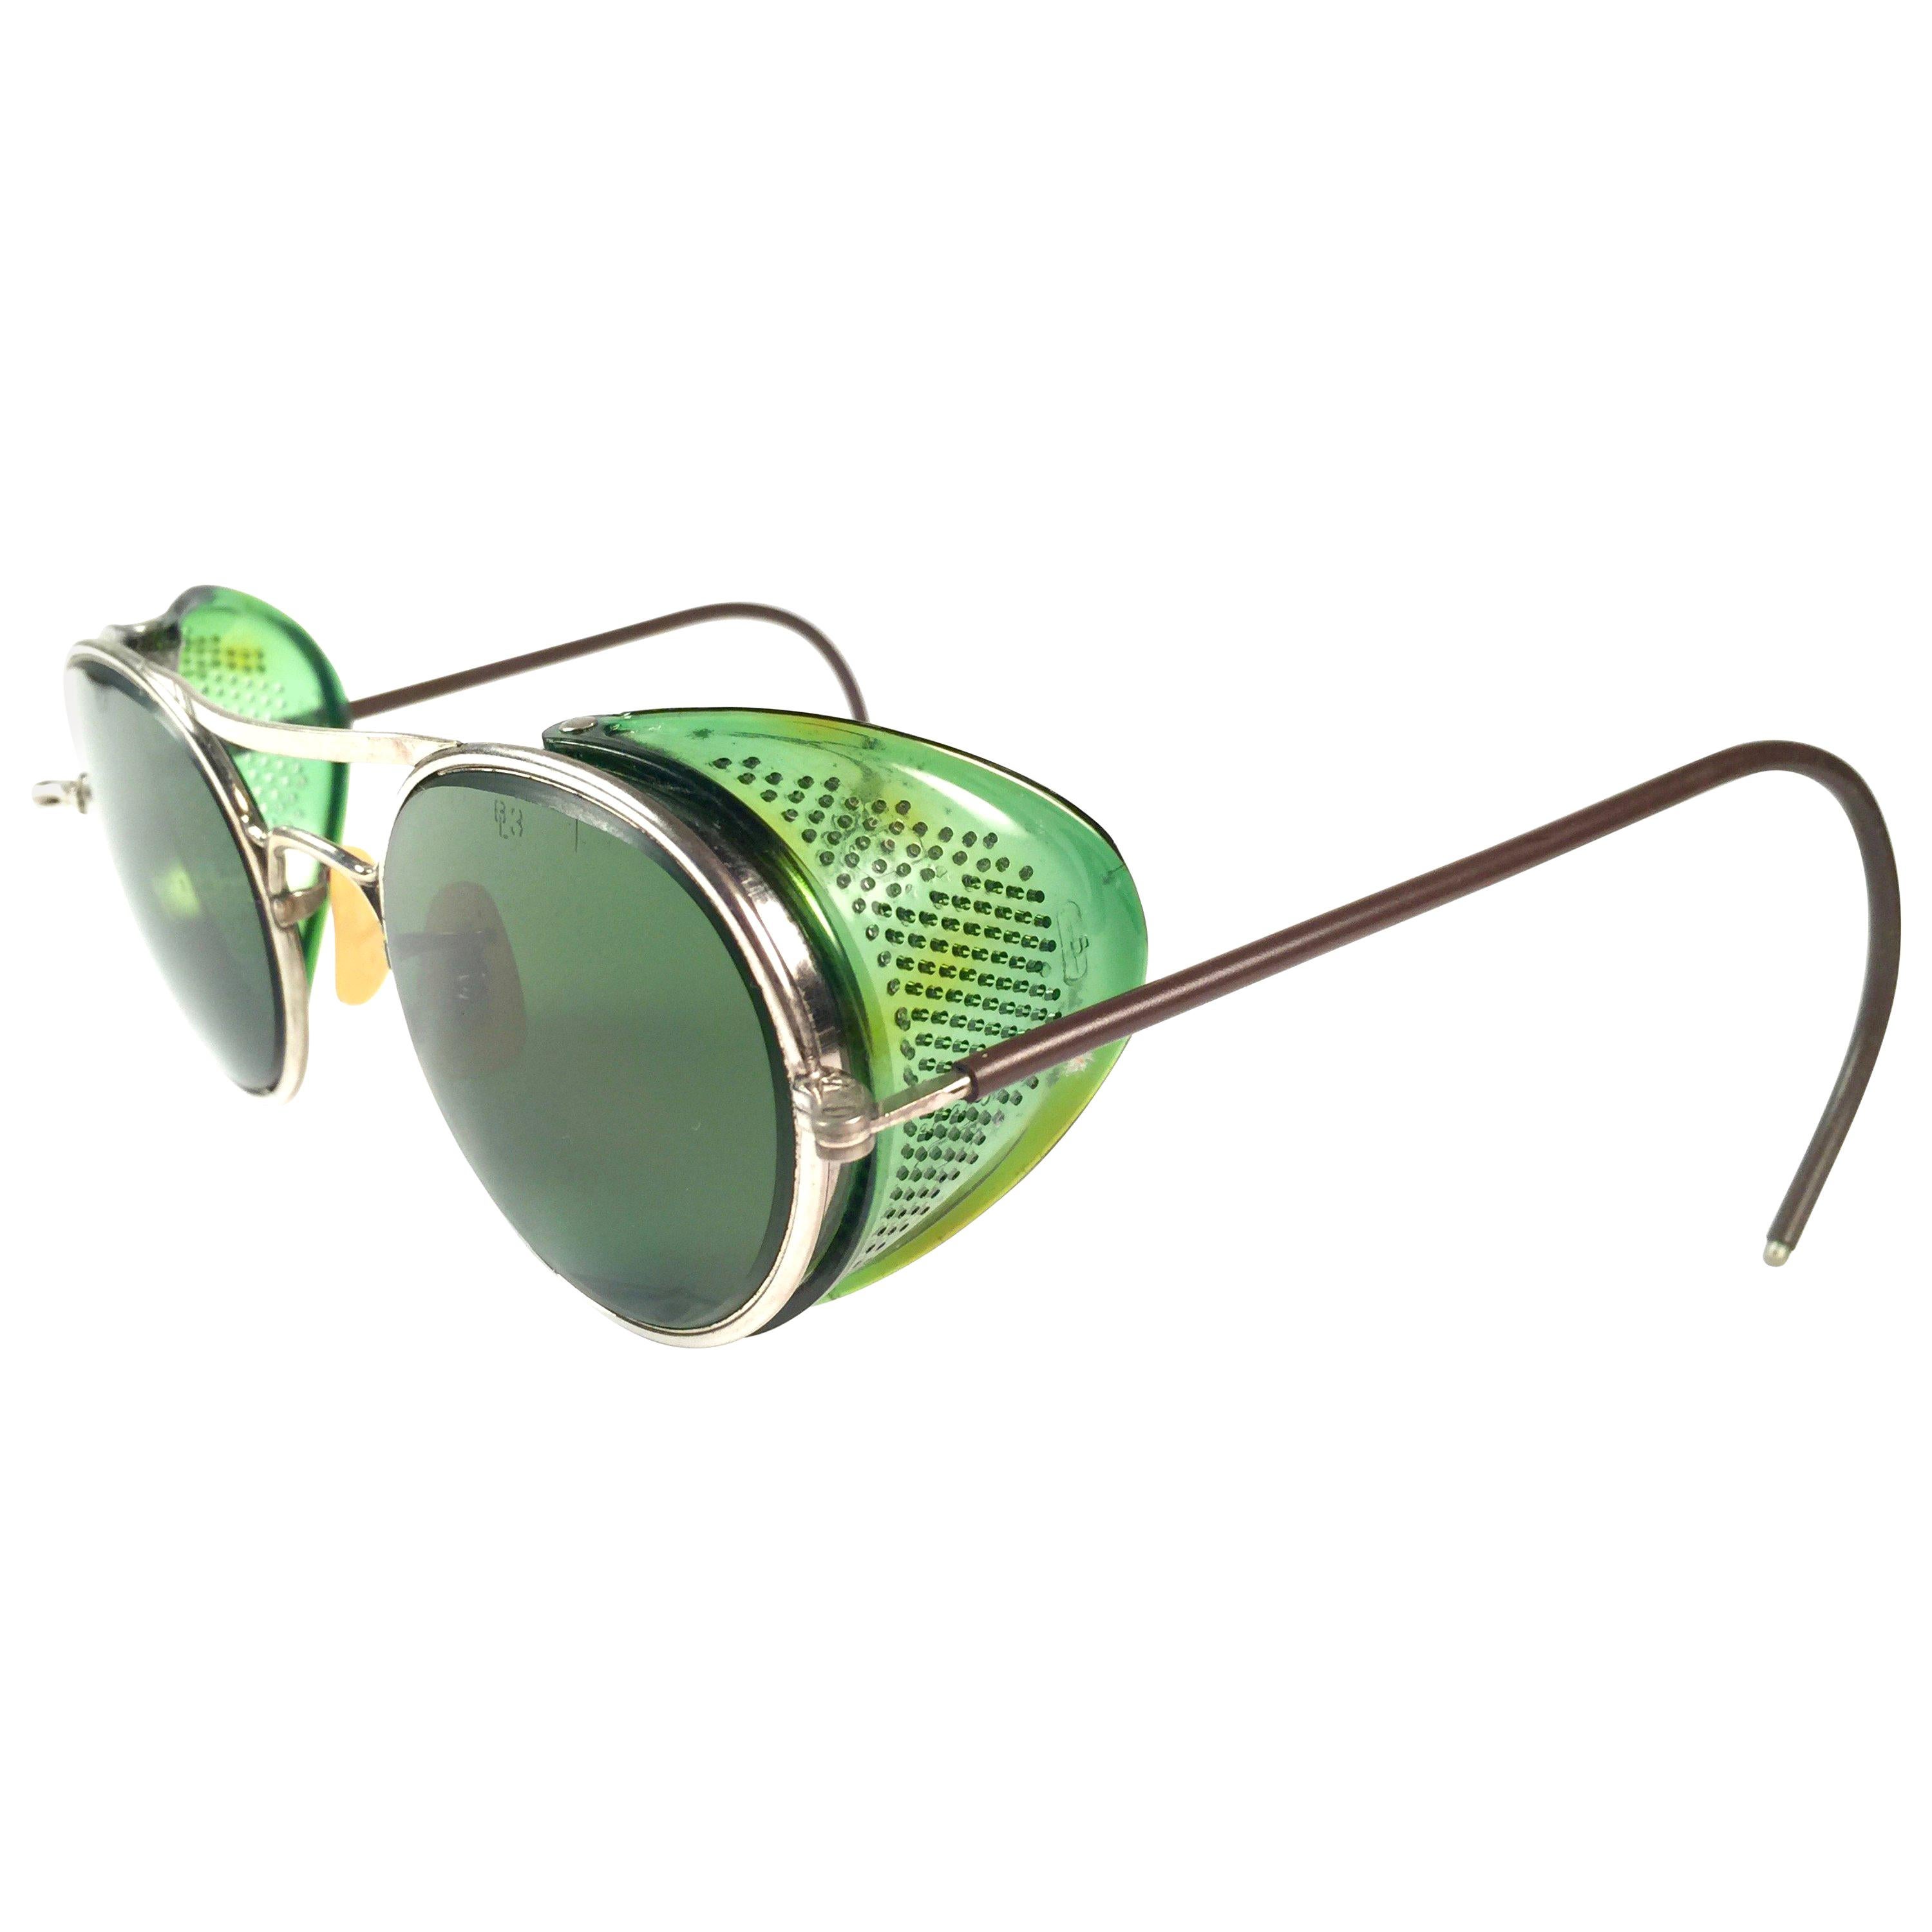 Mint Vintage Bausch & Lomb Goggles Green Steampunk 50s Collector Item Sunglasses